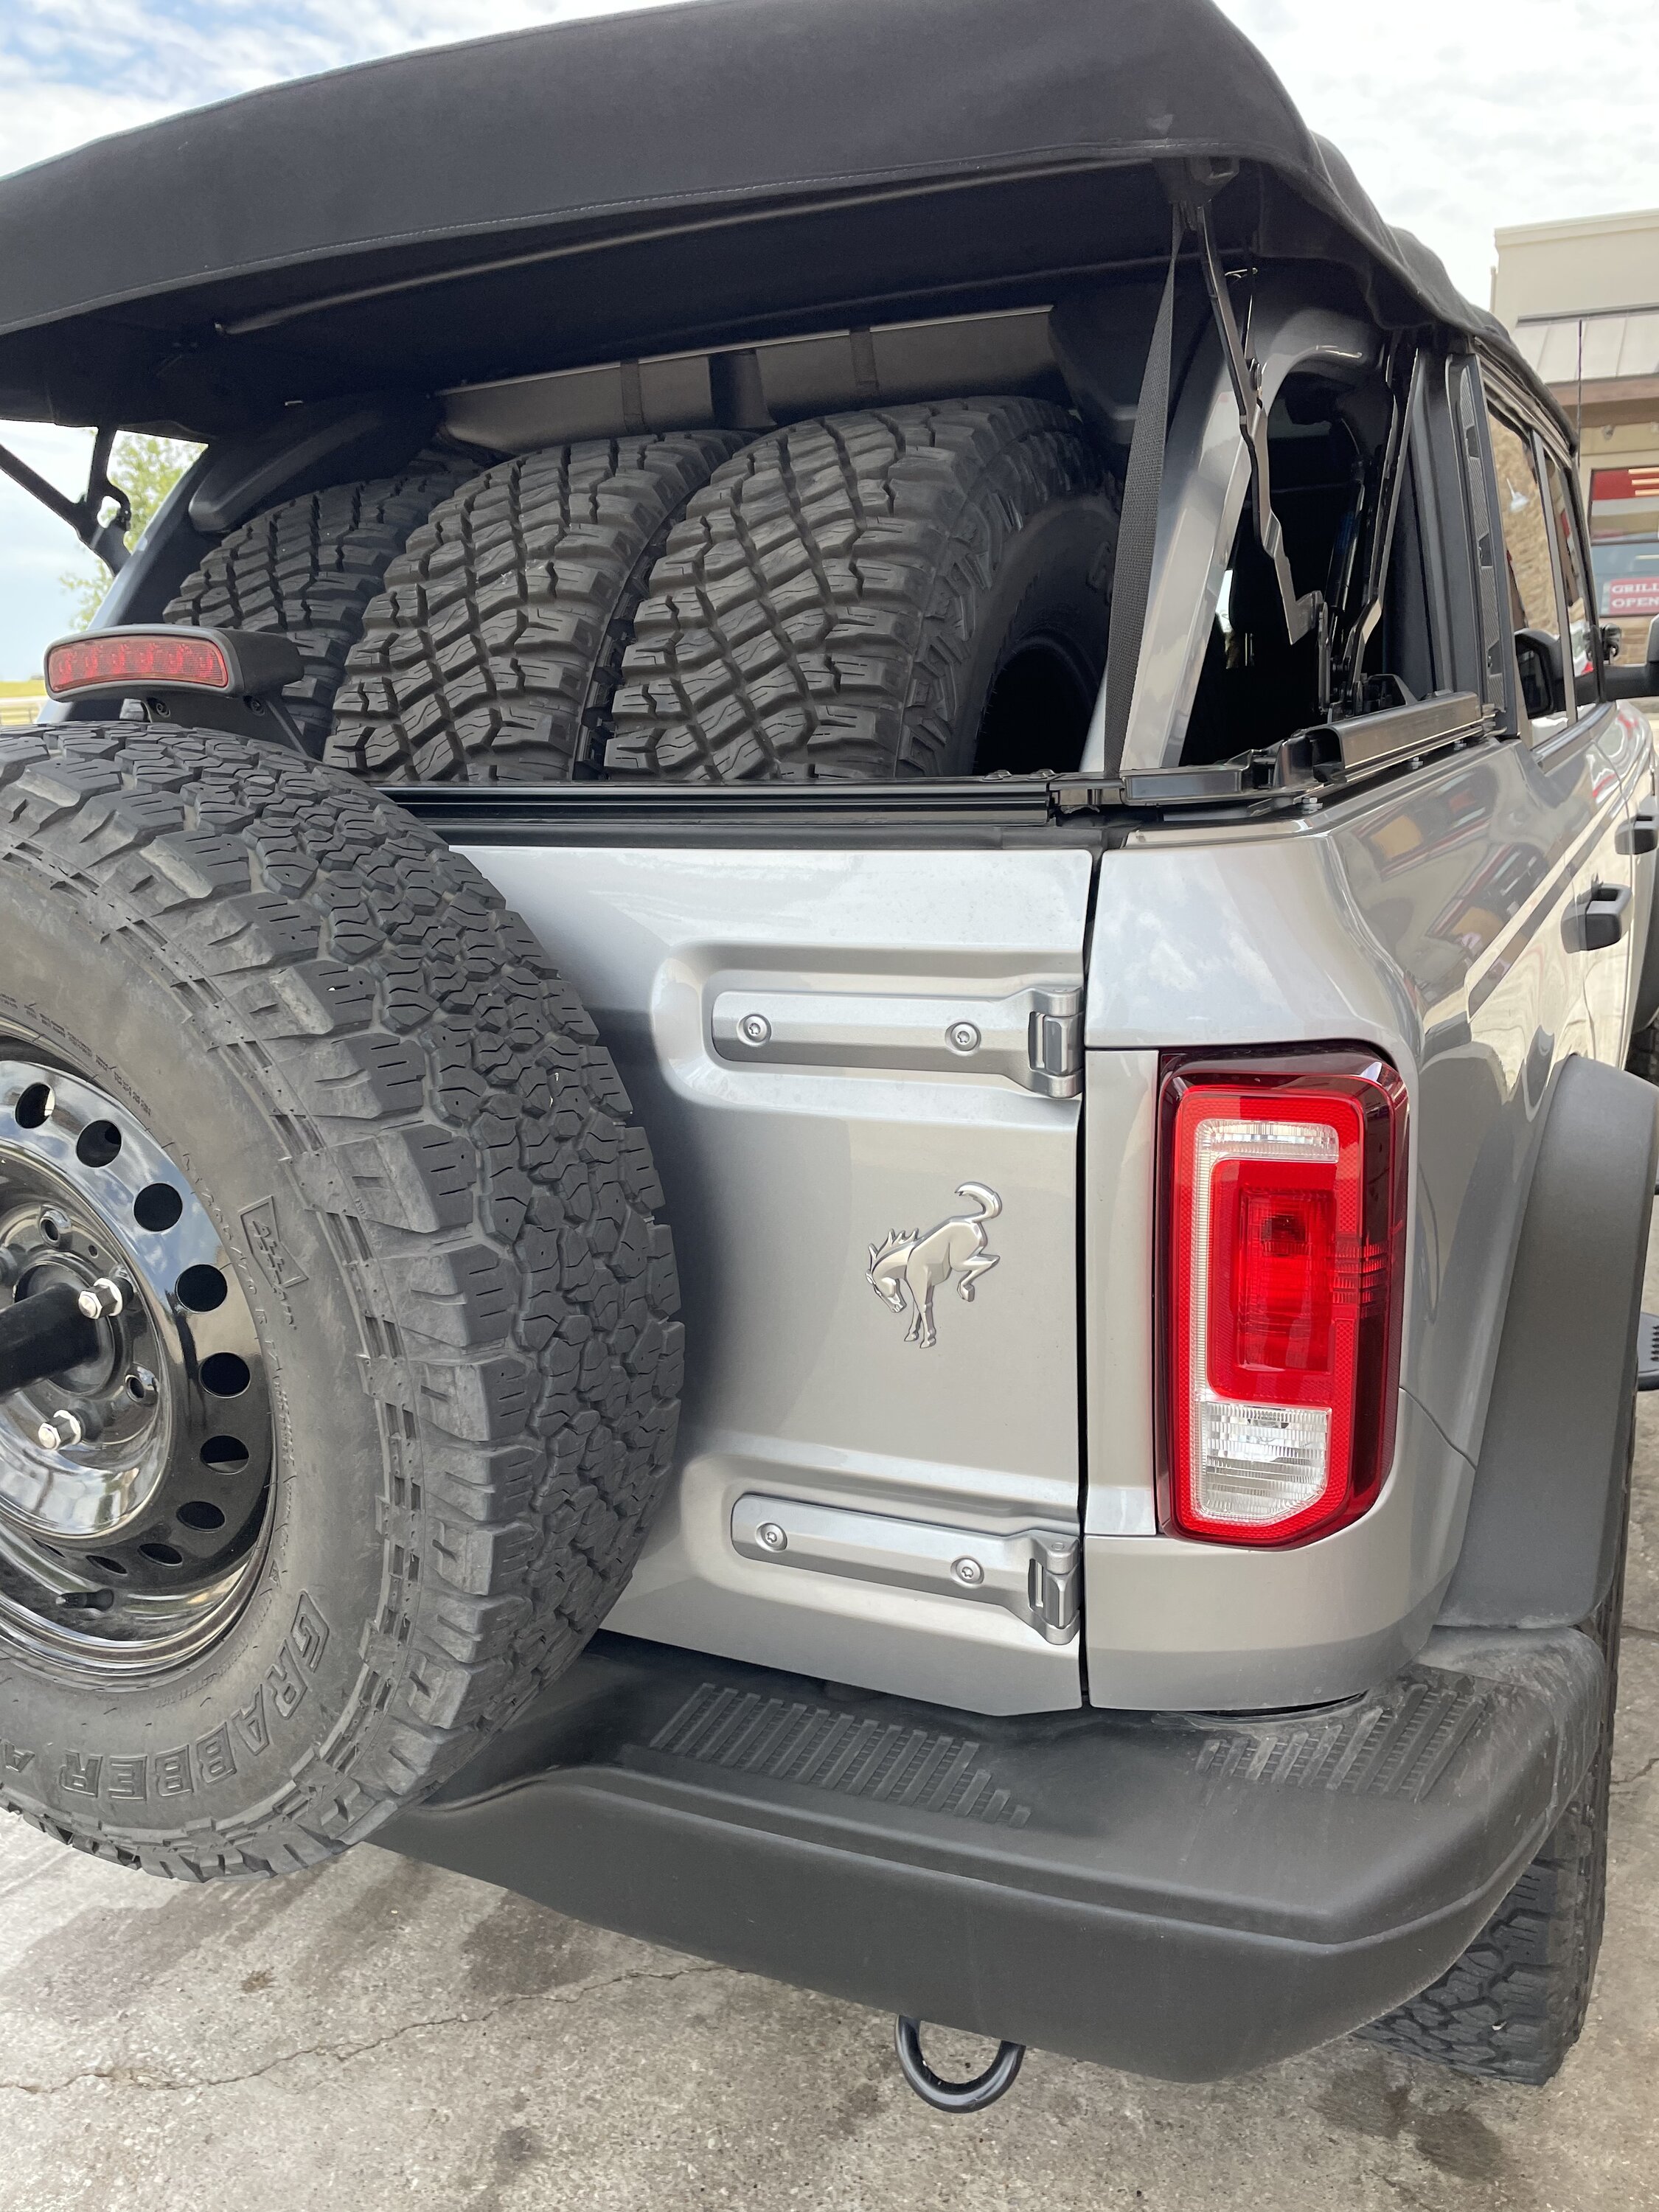 Ford Bronco Will five Badlands take-offs fit in the back of a 4 Dr Outerbanks 6A4DD279-F298-4991-A43F-517B8F64C102